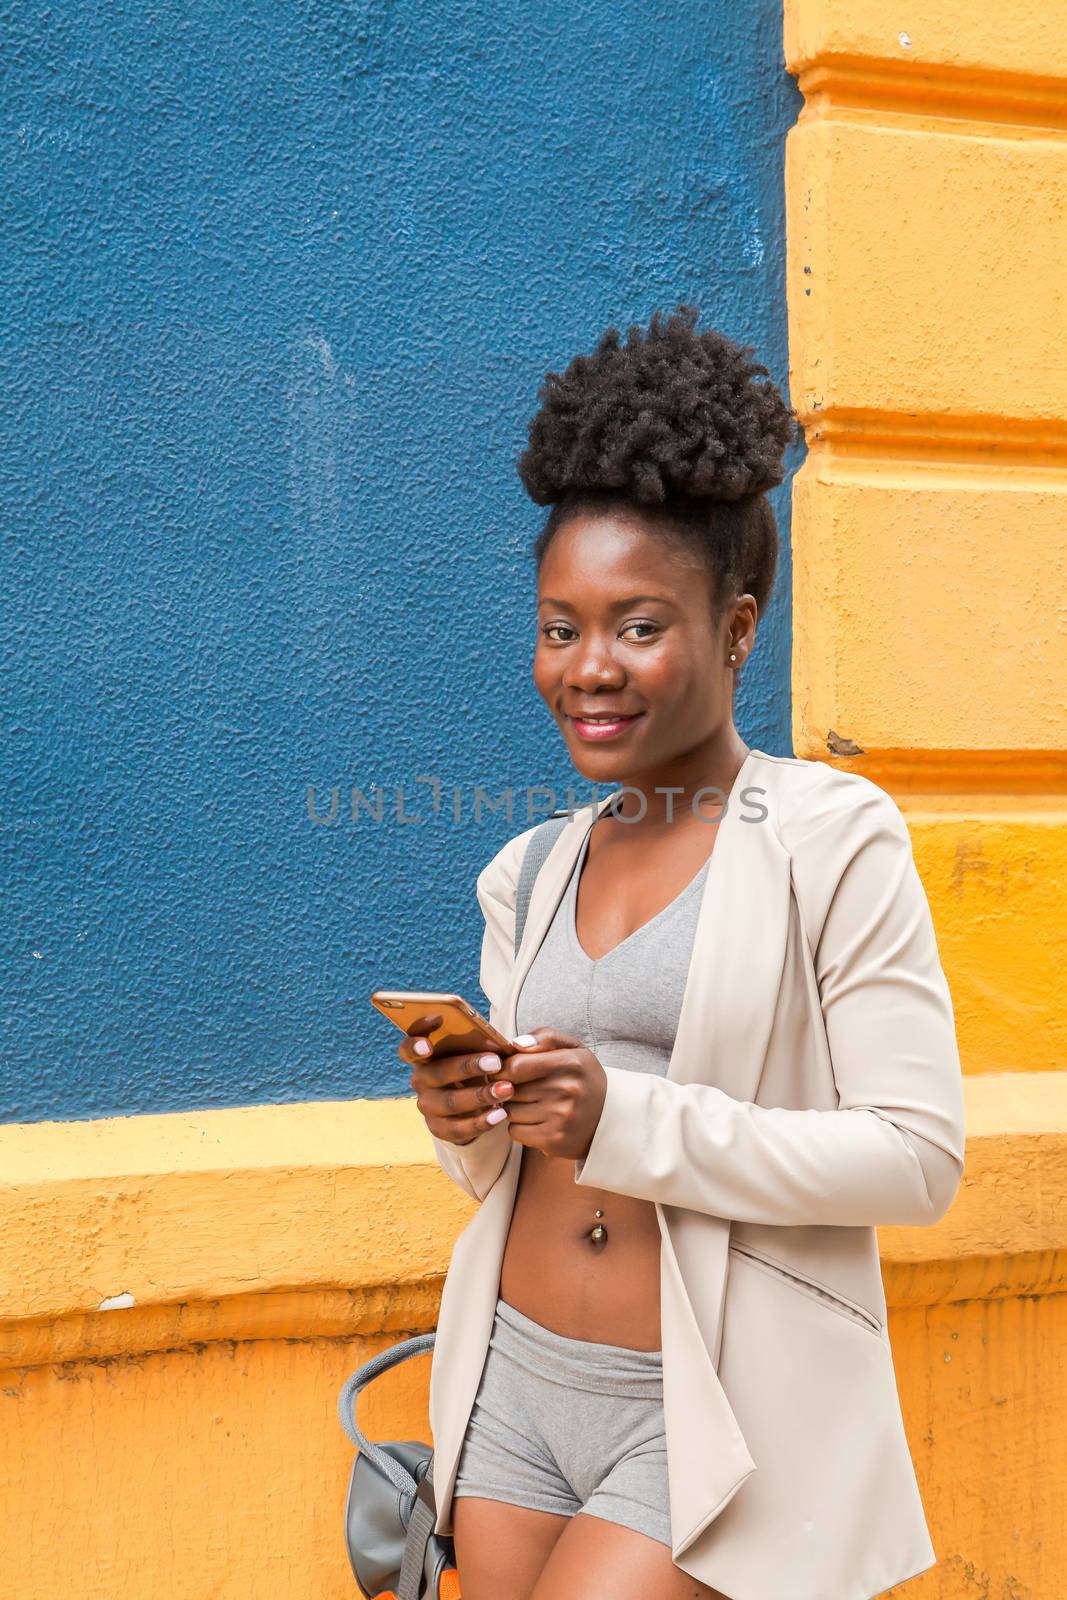 Medium shot of an african young woman in sportswear looking at his mobile phone with a colorful wall blue and yellow